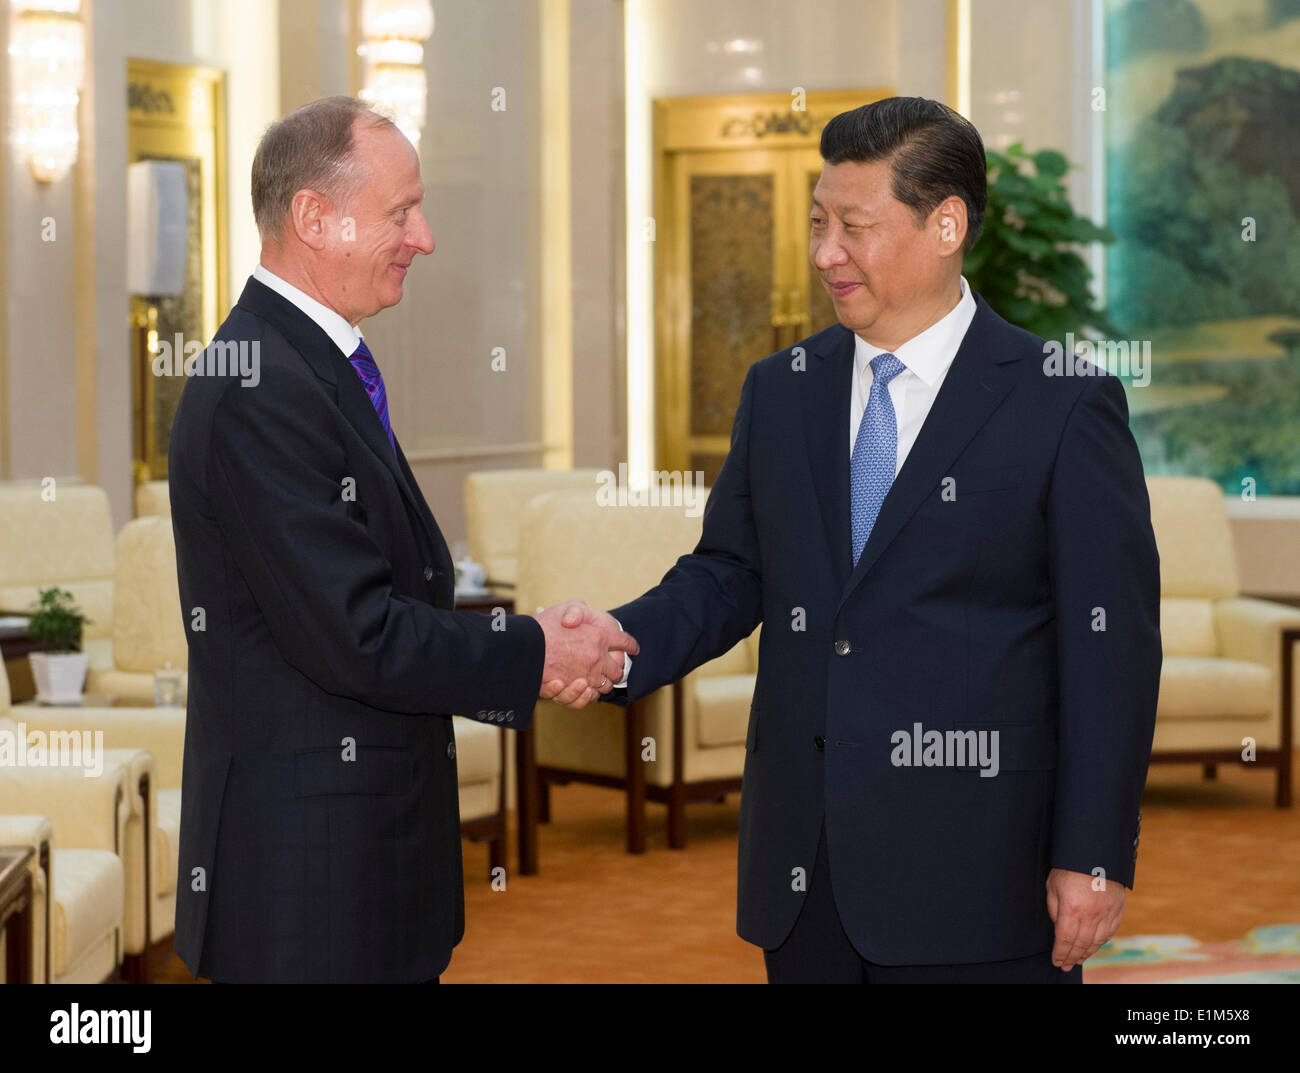 Beijing, China. 6th June, 2014. Chinese President Xi Jinping (R) meets with Russian Security Council Secretary Nikolai Patrushev in Beijing, capital of China, June 6, 2014. Nikolai Patrushev was here to attend the first meeting of China-Russia institutionalized cooperation in law enforcement and security and the 10th round of China-Russia strategic security consultation. © Xie Huanchi/Xinhua/Alamy Live News Stock Photo